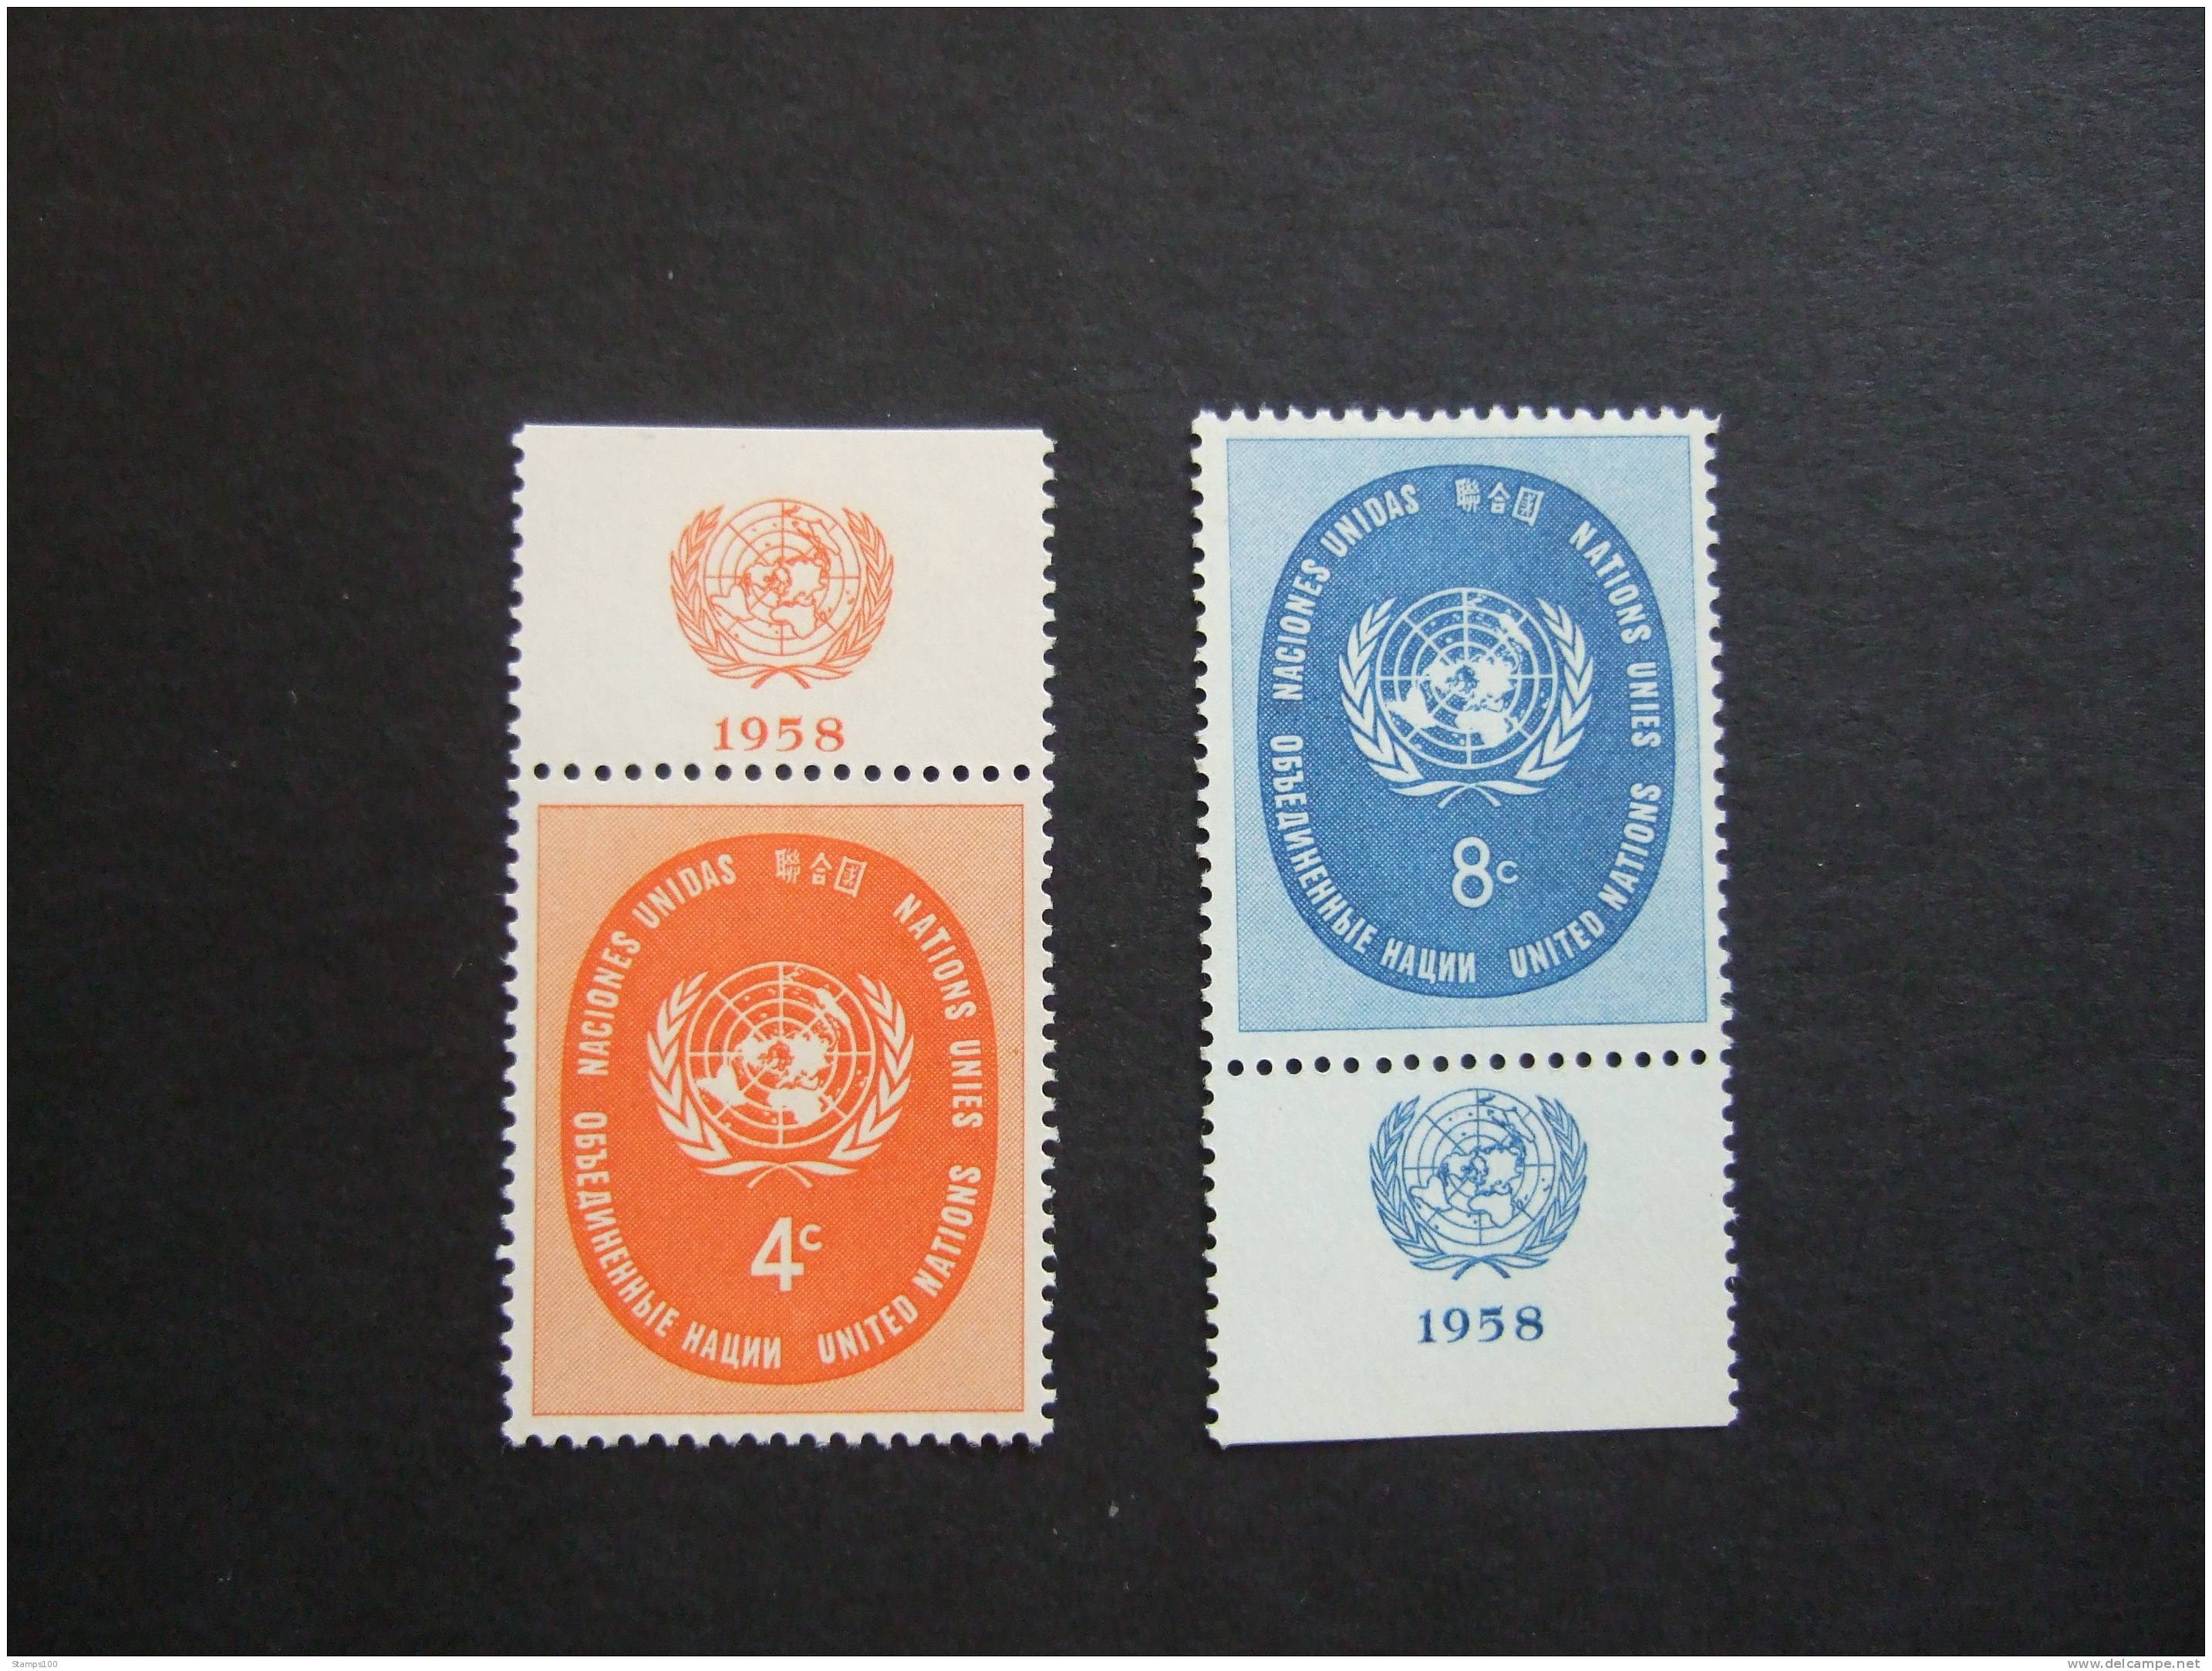 UNITED NATIONS NEW YORK, 1958,  Yv 63-64, WITH UN LOGO, MH**, (P39-025) - Ungebraucht